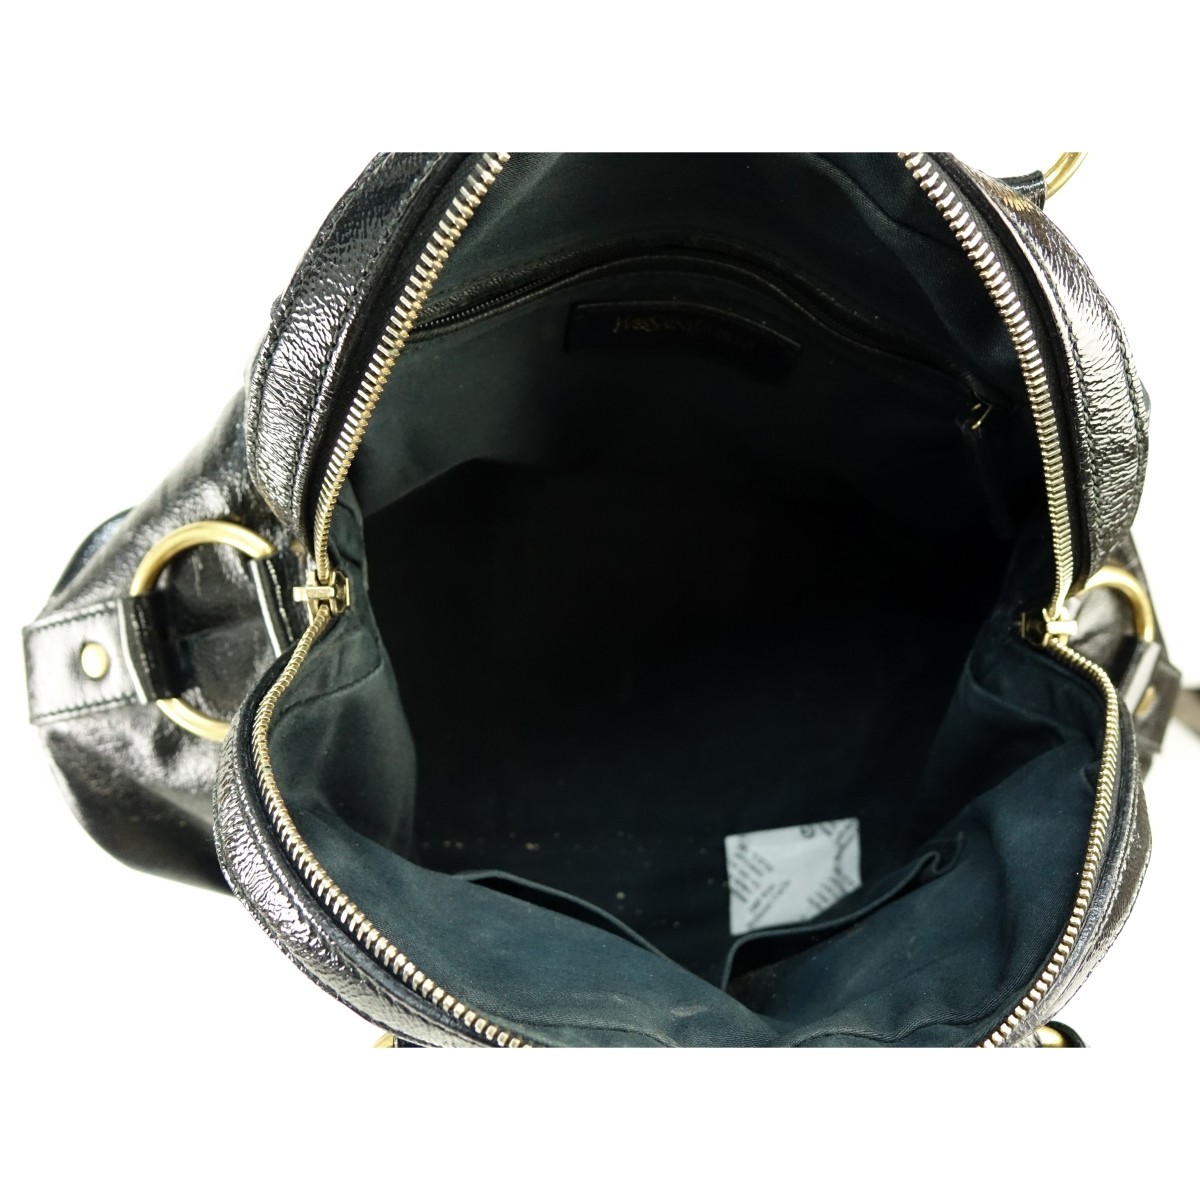 Yves St Laurent Black Patent Leather Muse 1 PM Bag